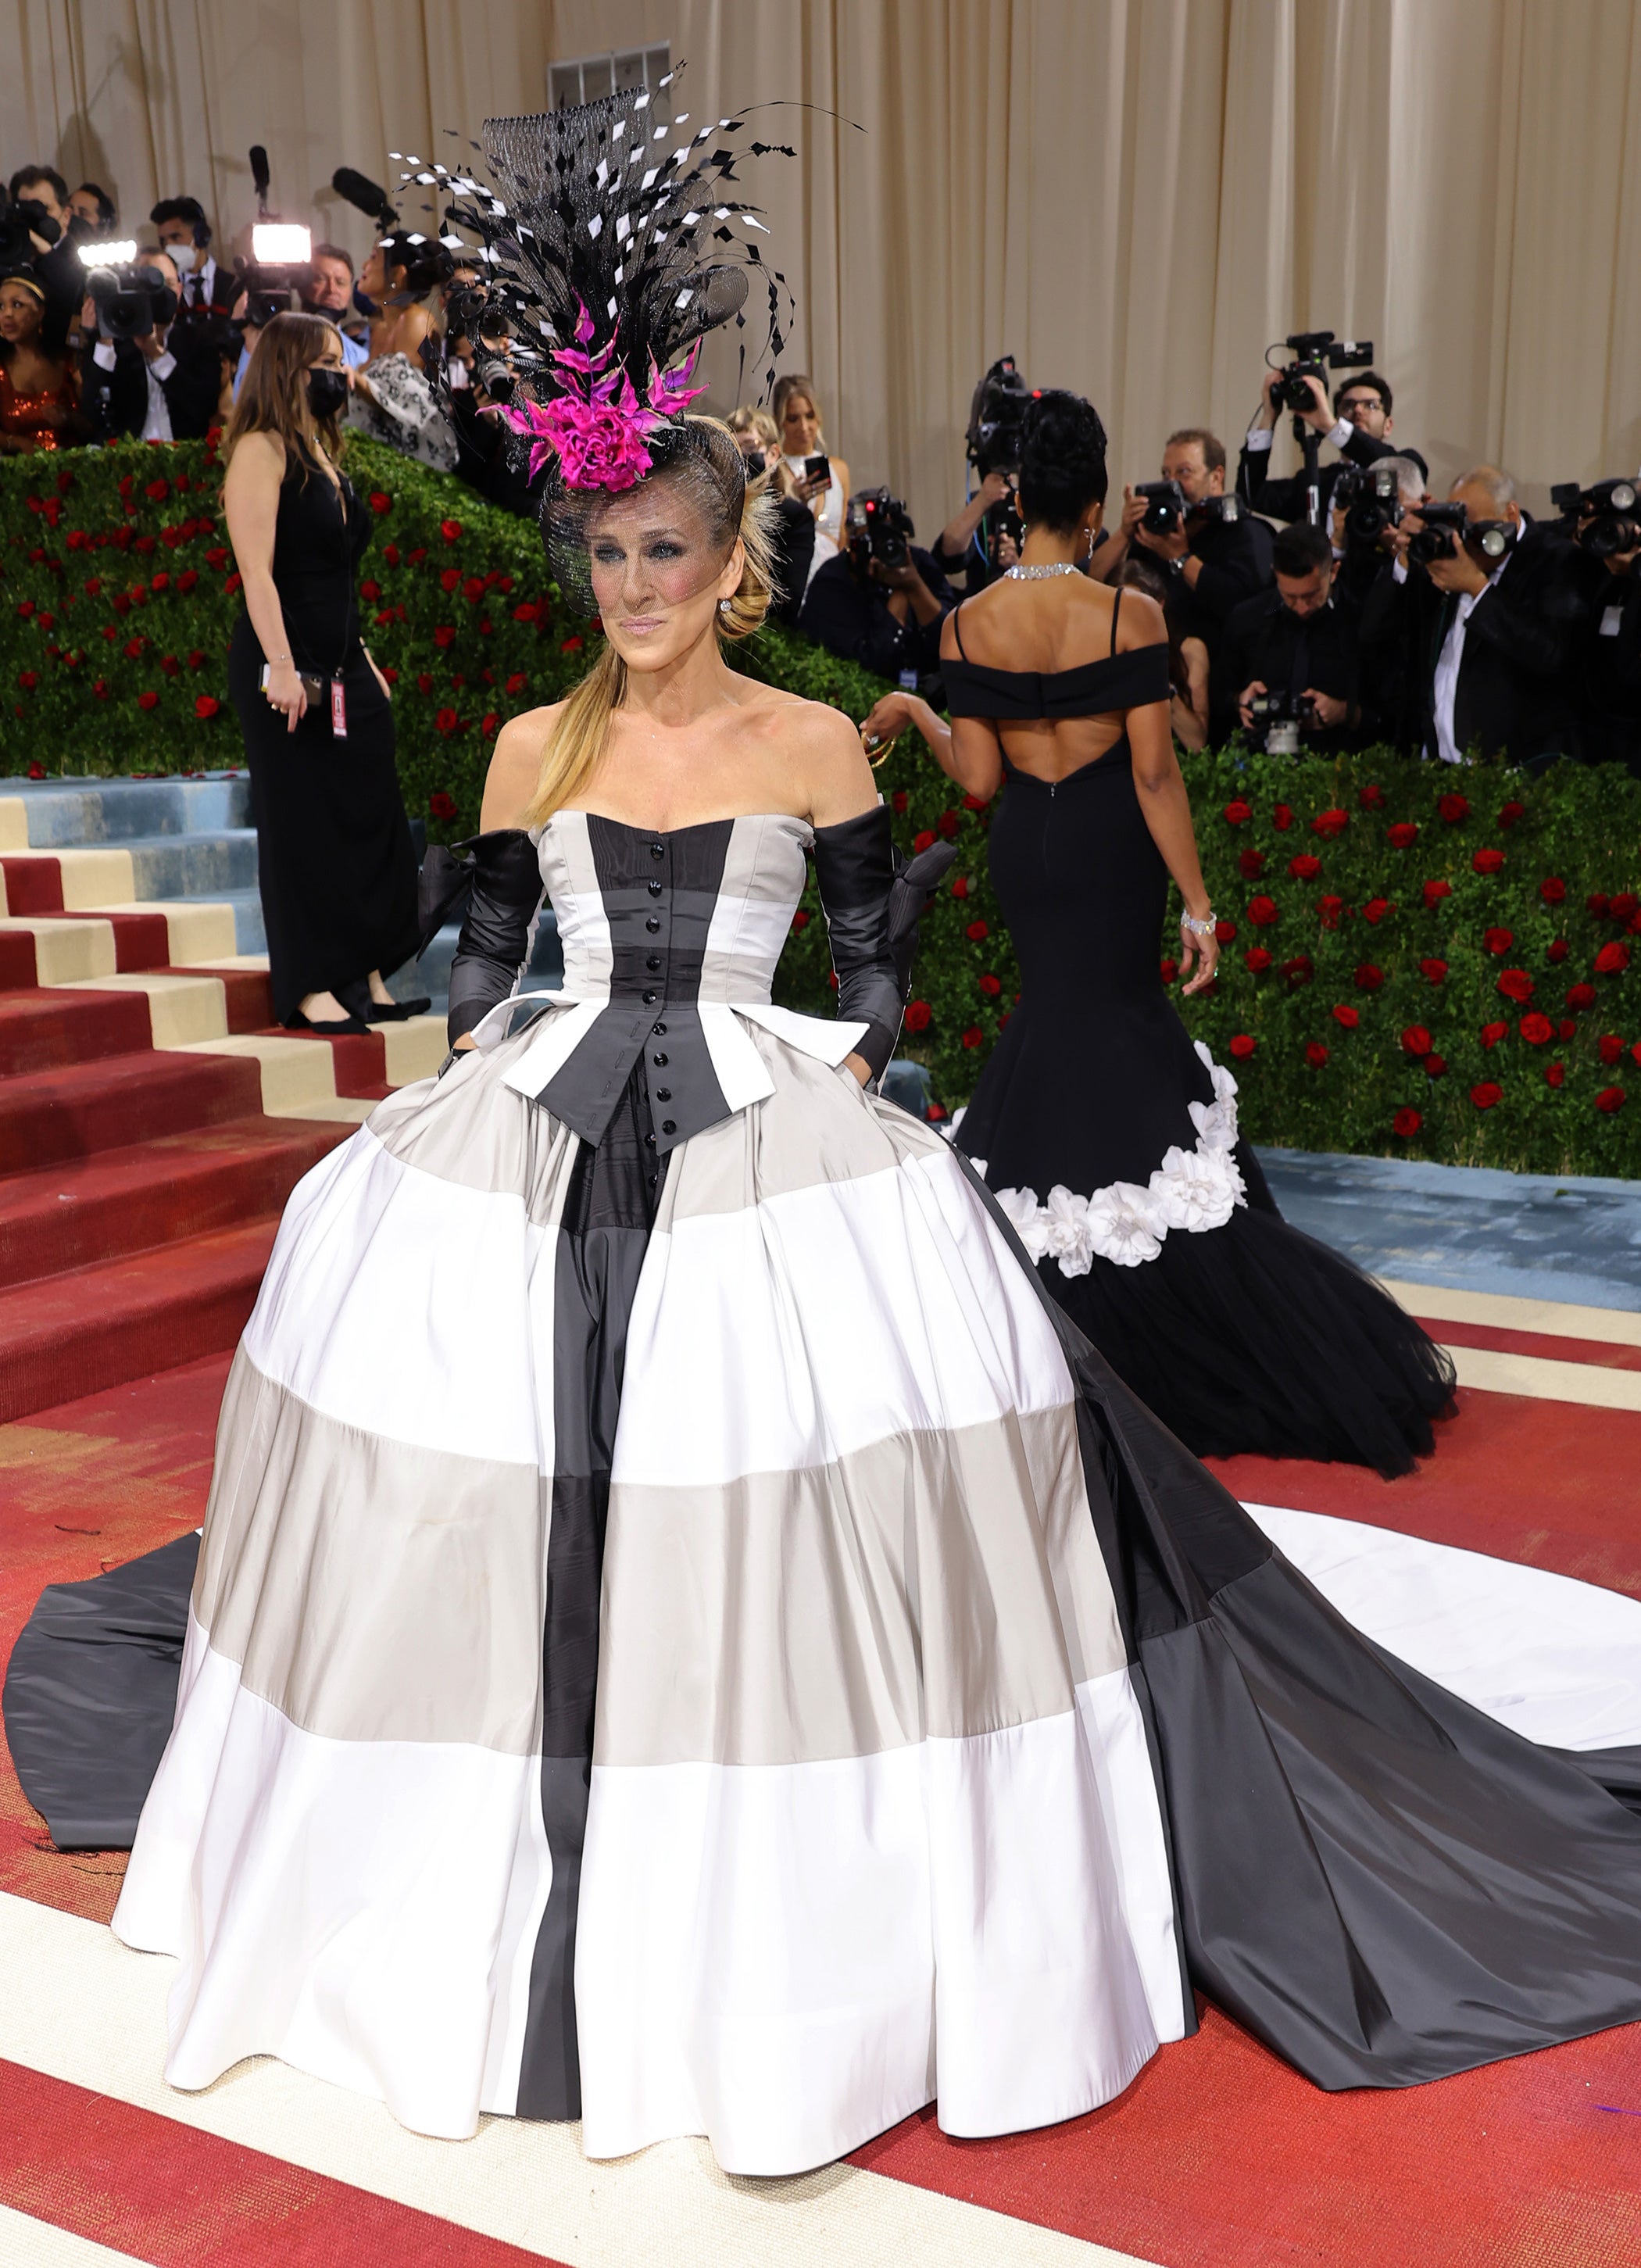 The 2022 Met Gala Theme and Dress Code, Explained